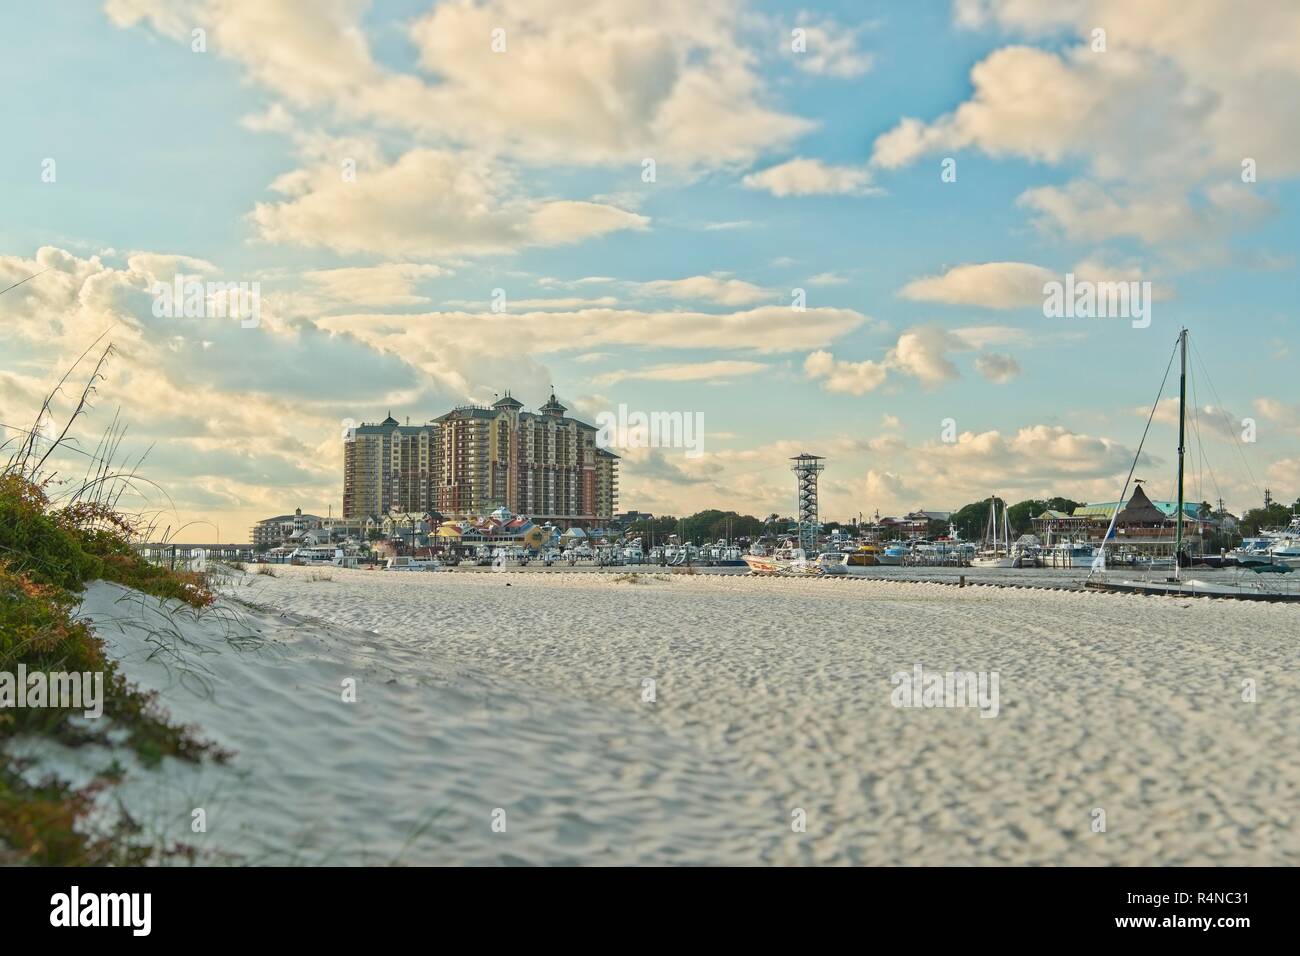 White sand beach and dune with the Emerald Grande at HarborWalk Village and the Destin Florida commercial sport fishing fleet tied up at the marina. Stock Photo